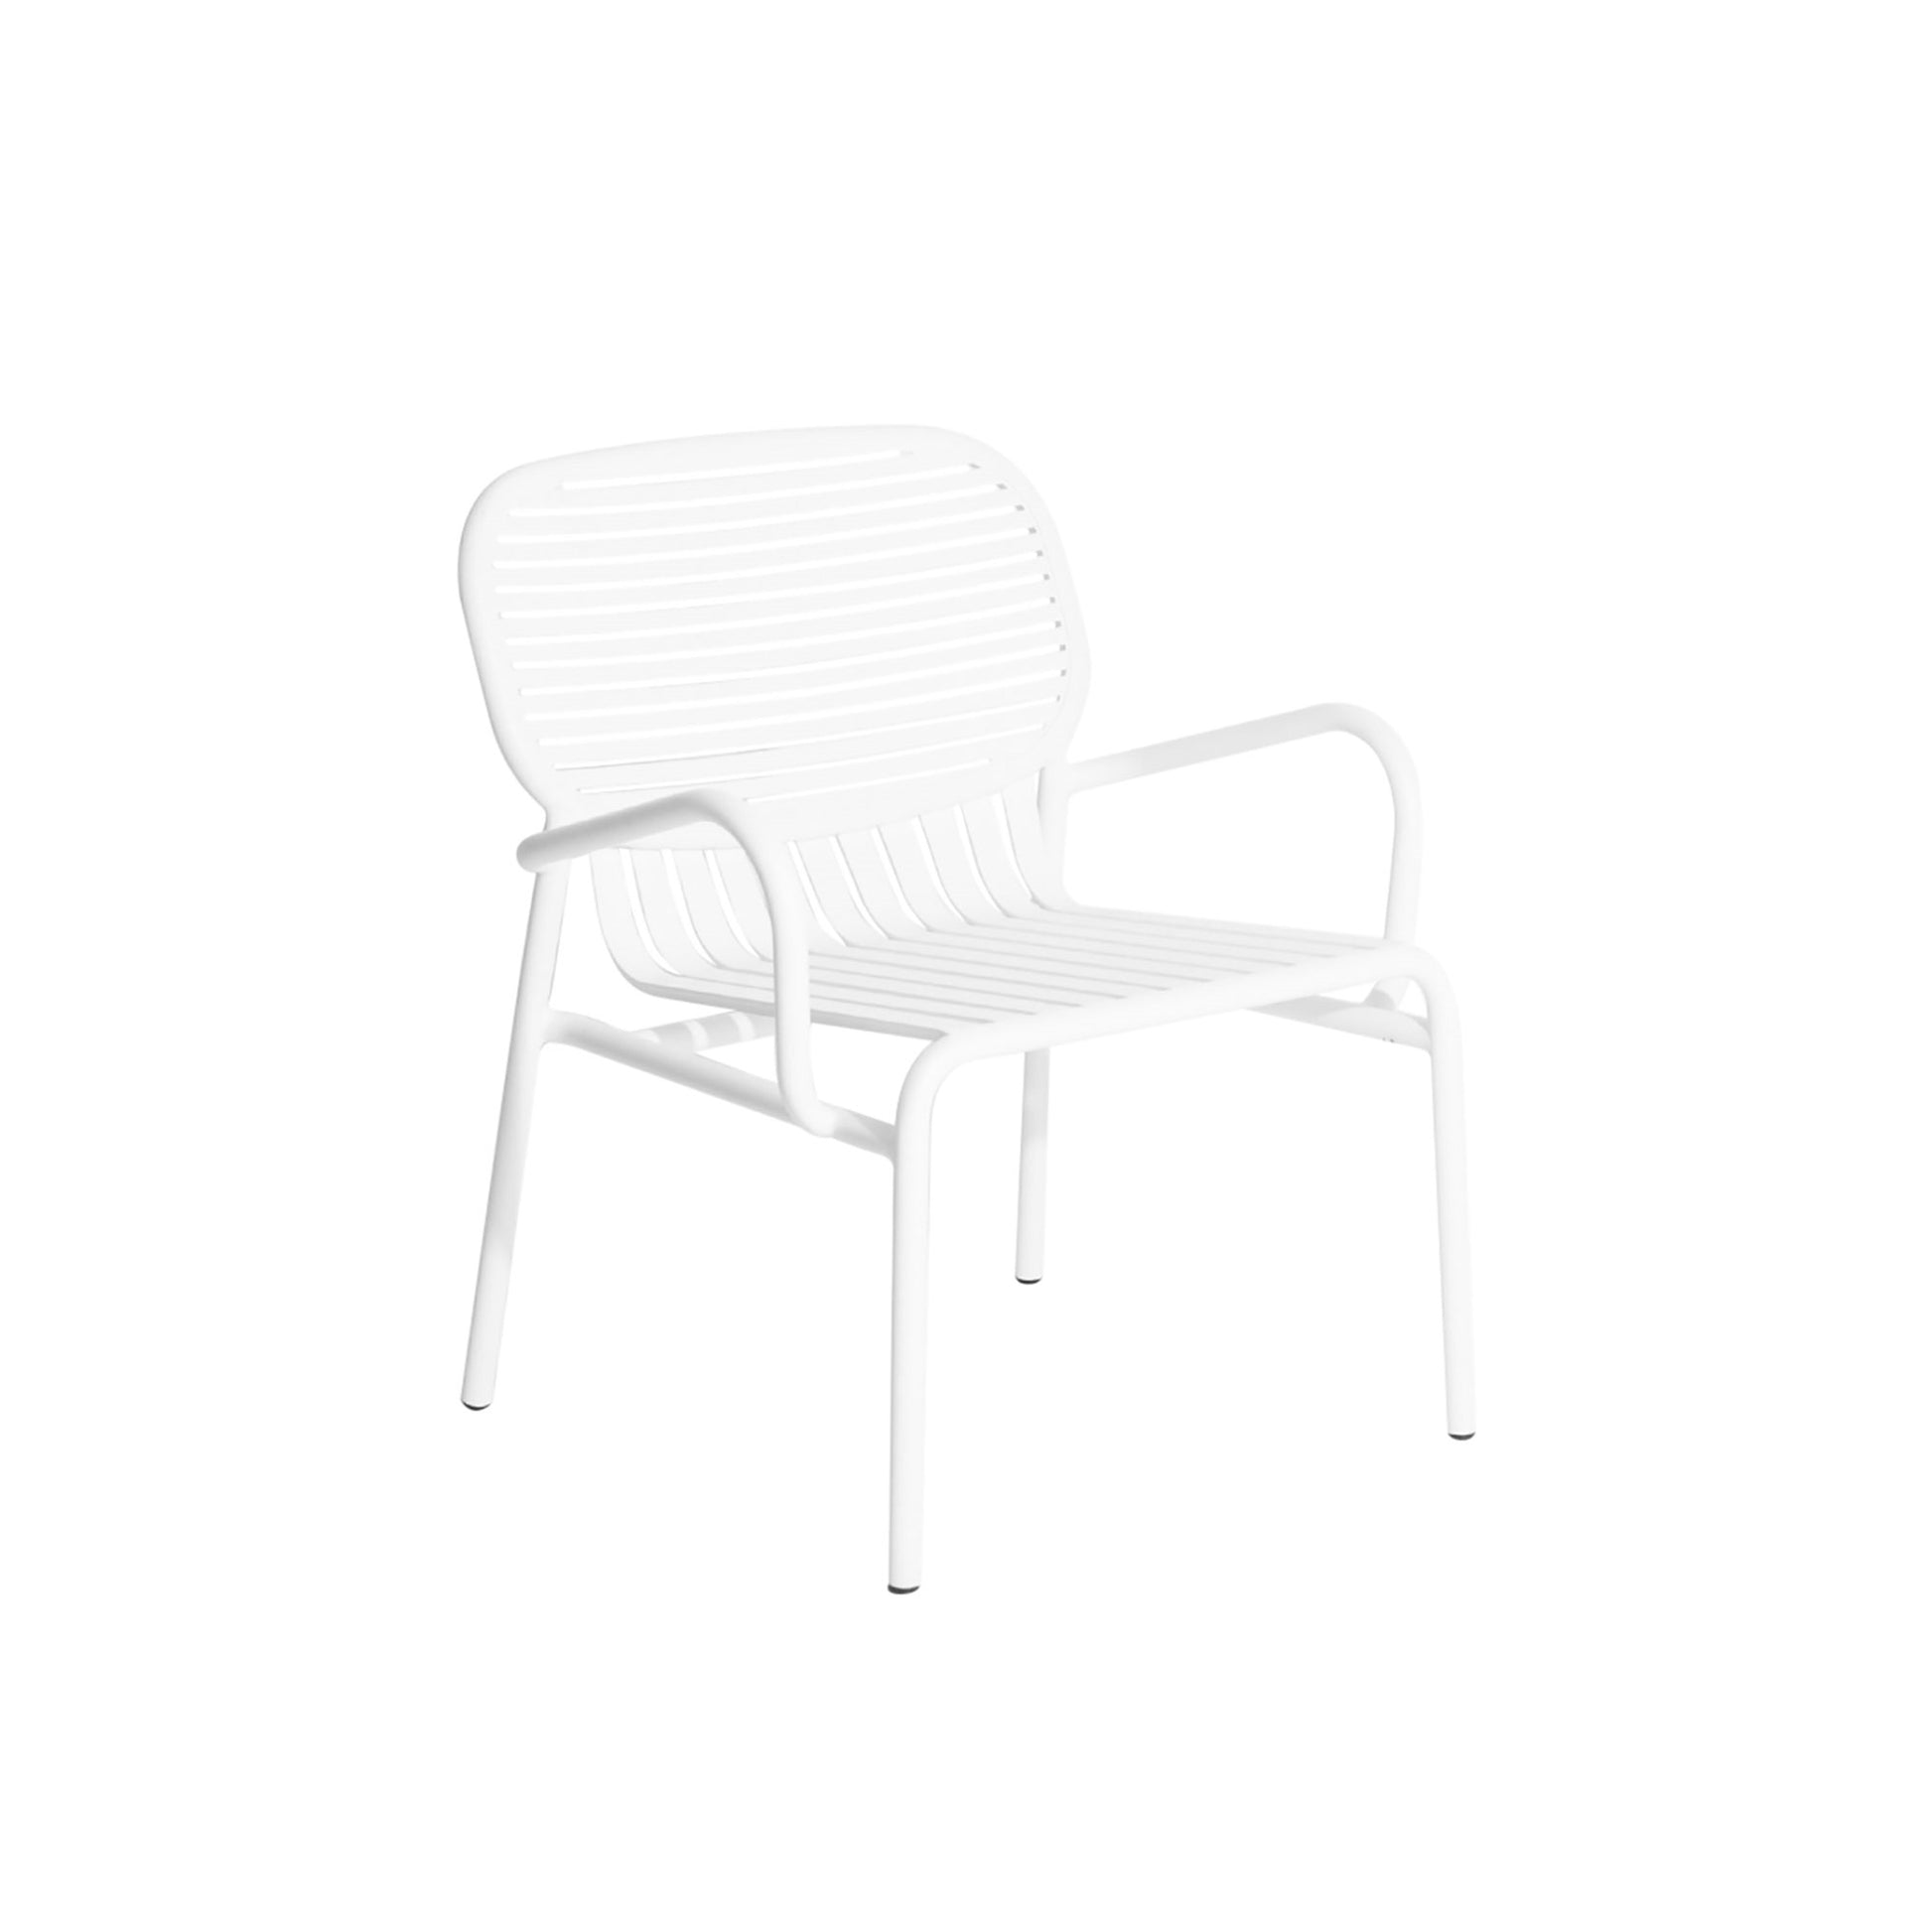 WEEK-END Armchair by Petite Friture #White